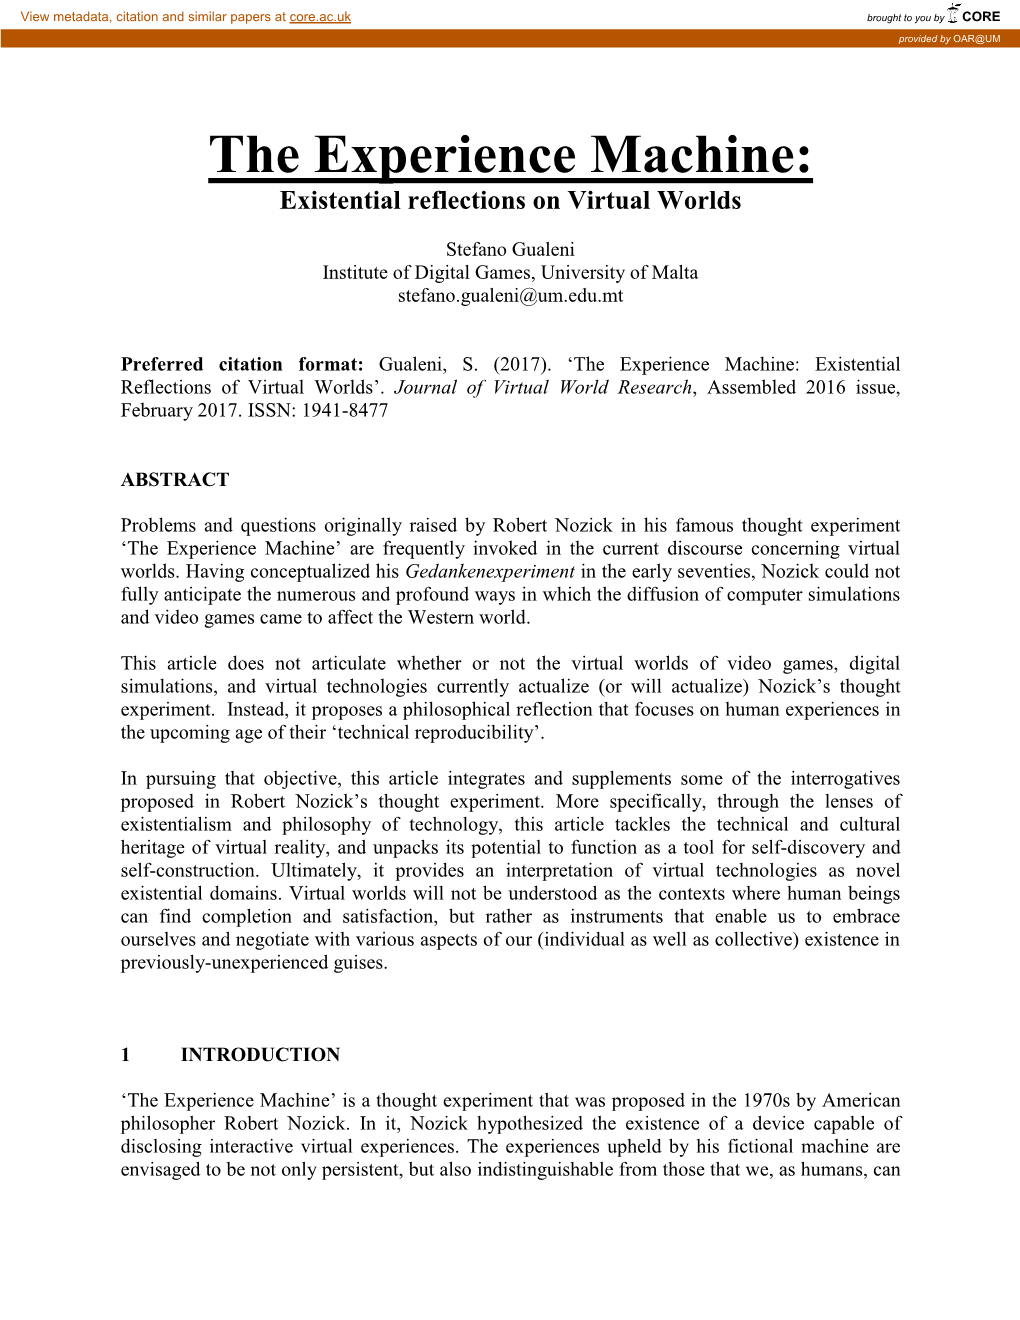 The Experience Machine: Existential Reflections on Virtual Worlds